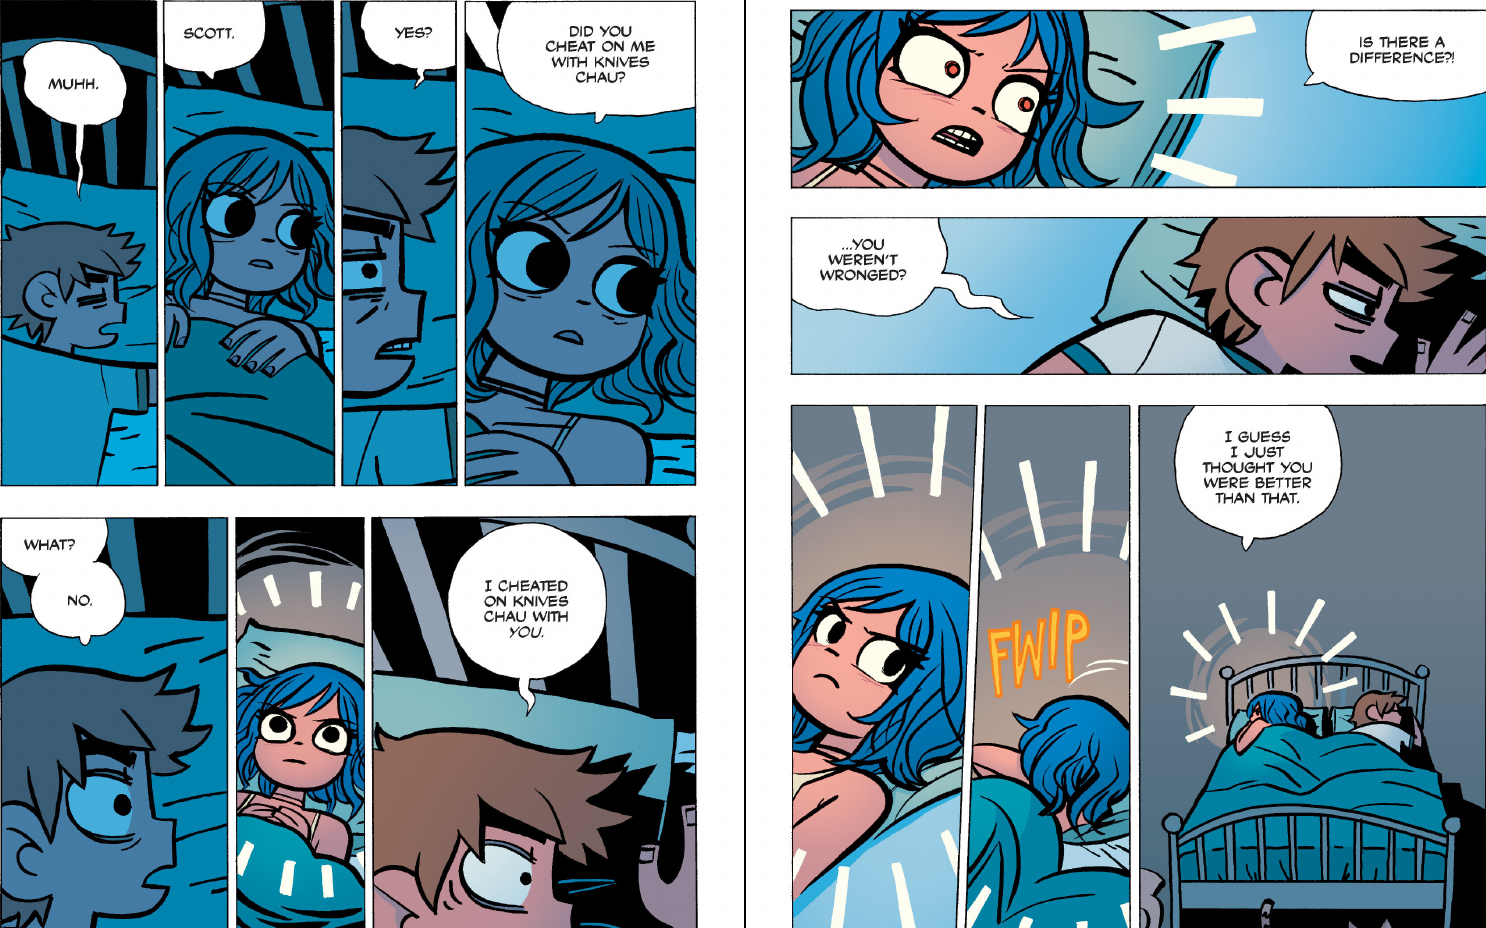 Scott Pilgrim vs The Universe - "Did you cheat on me with Knives Chau?...